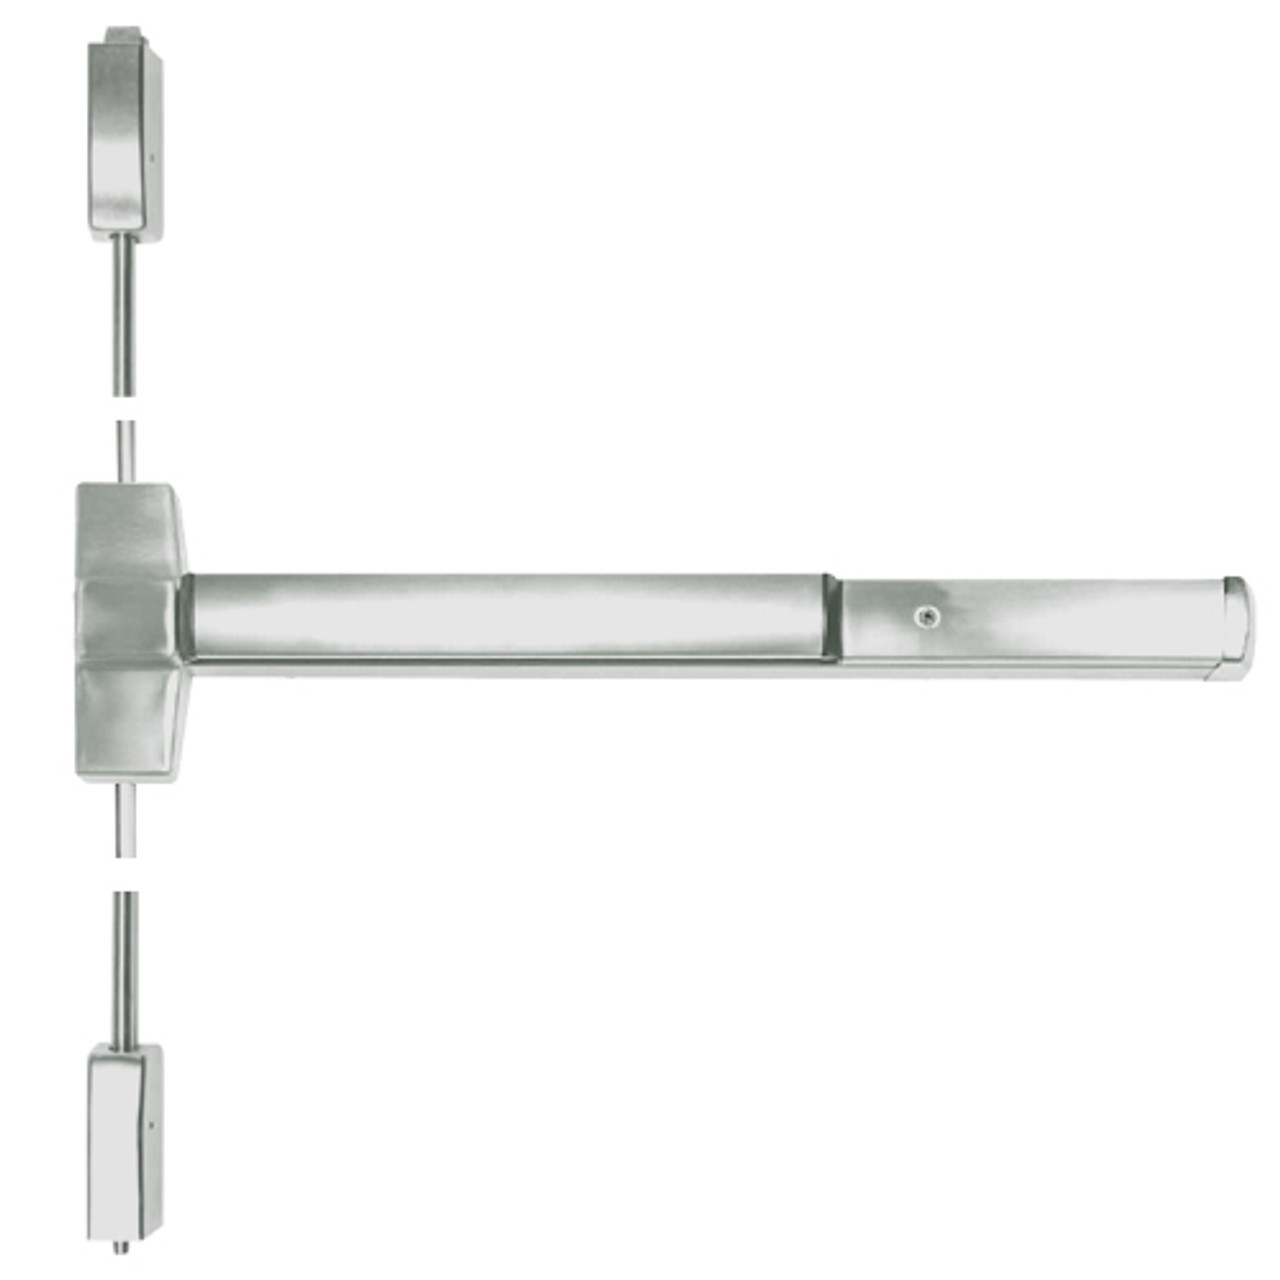 ED5470-619-M61 Corbin ED5400 Series Non Fire Rated Vertical Rod Exit Device with Exit Alarm Device in Satin Nickel Finish